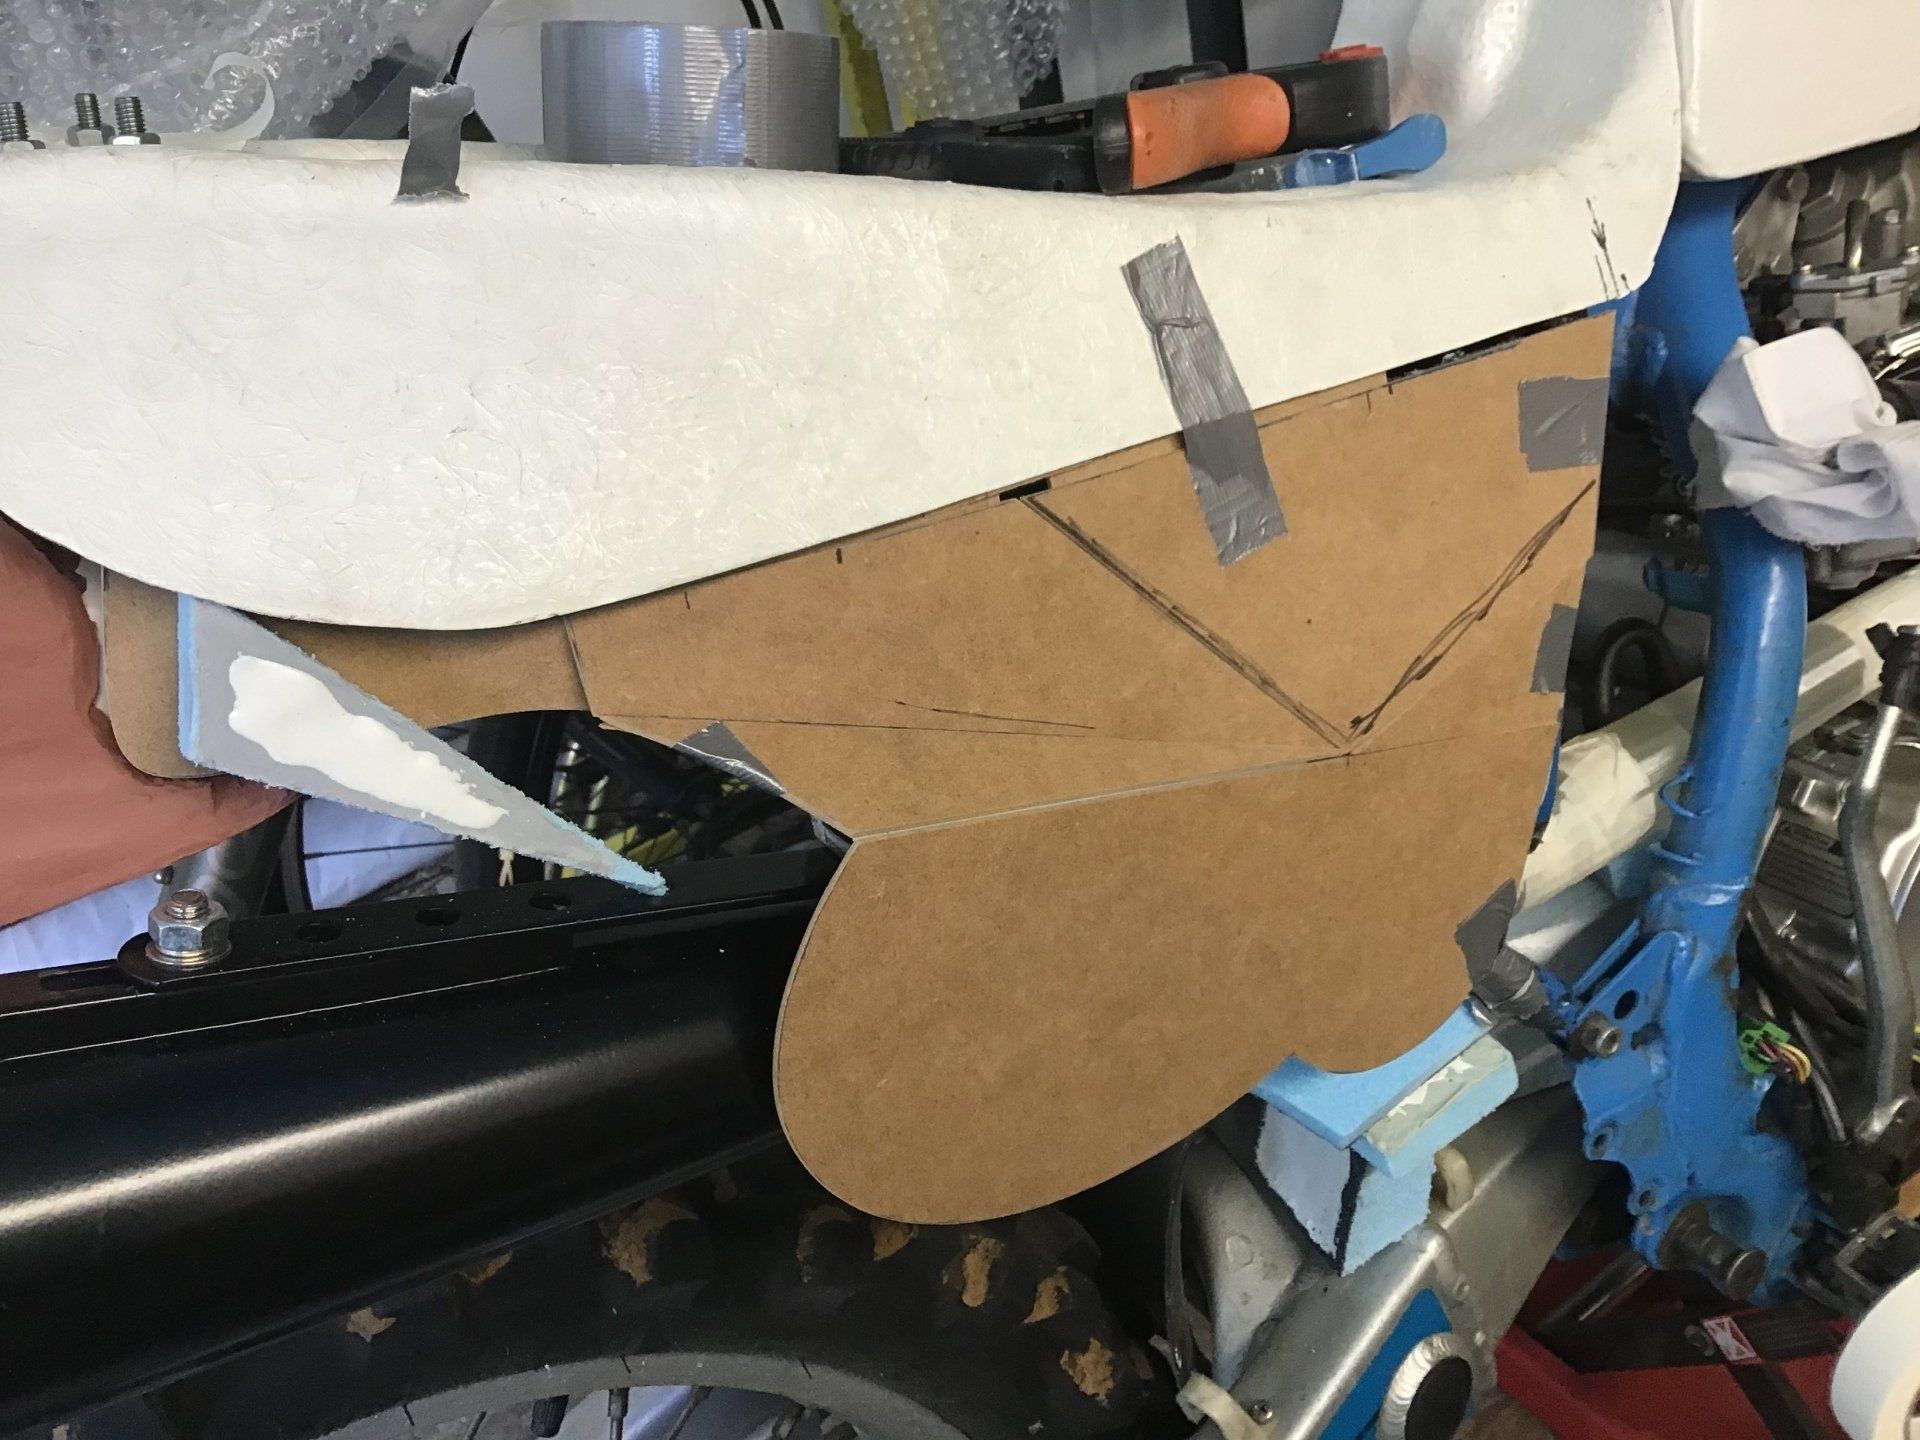 Shaping the motorcycle side panel